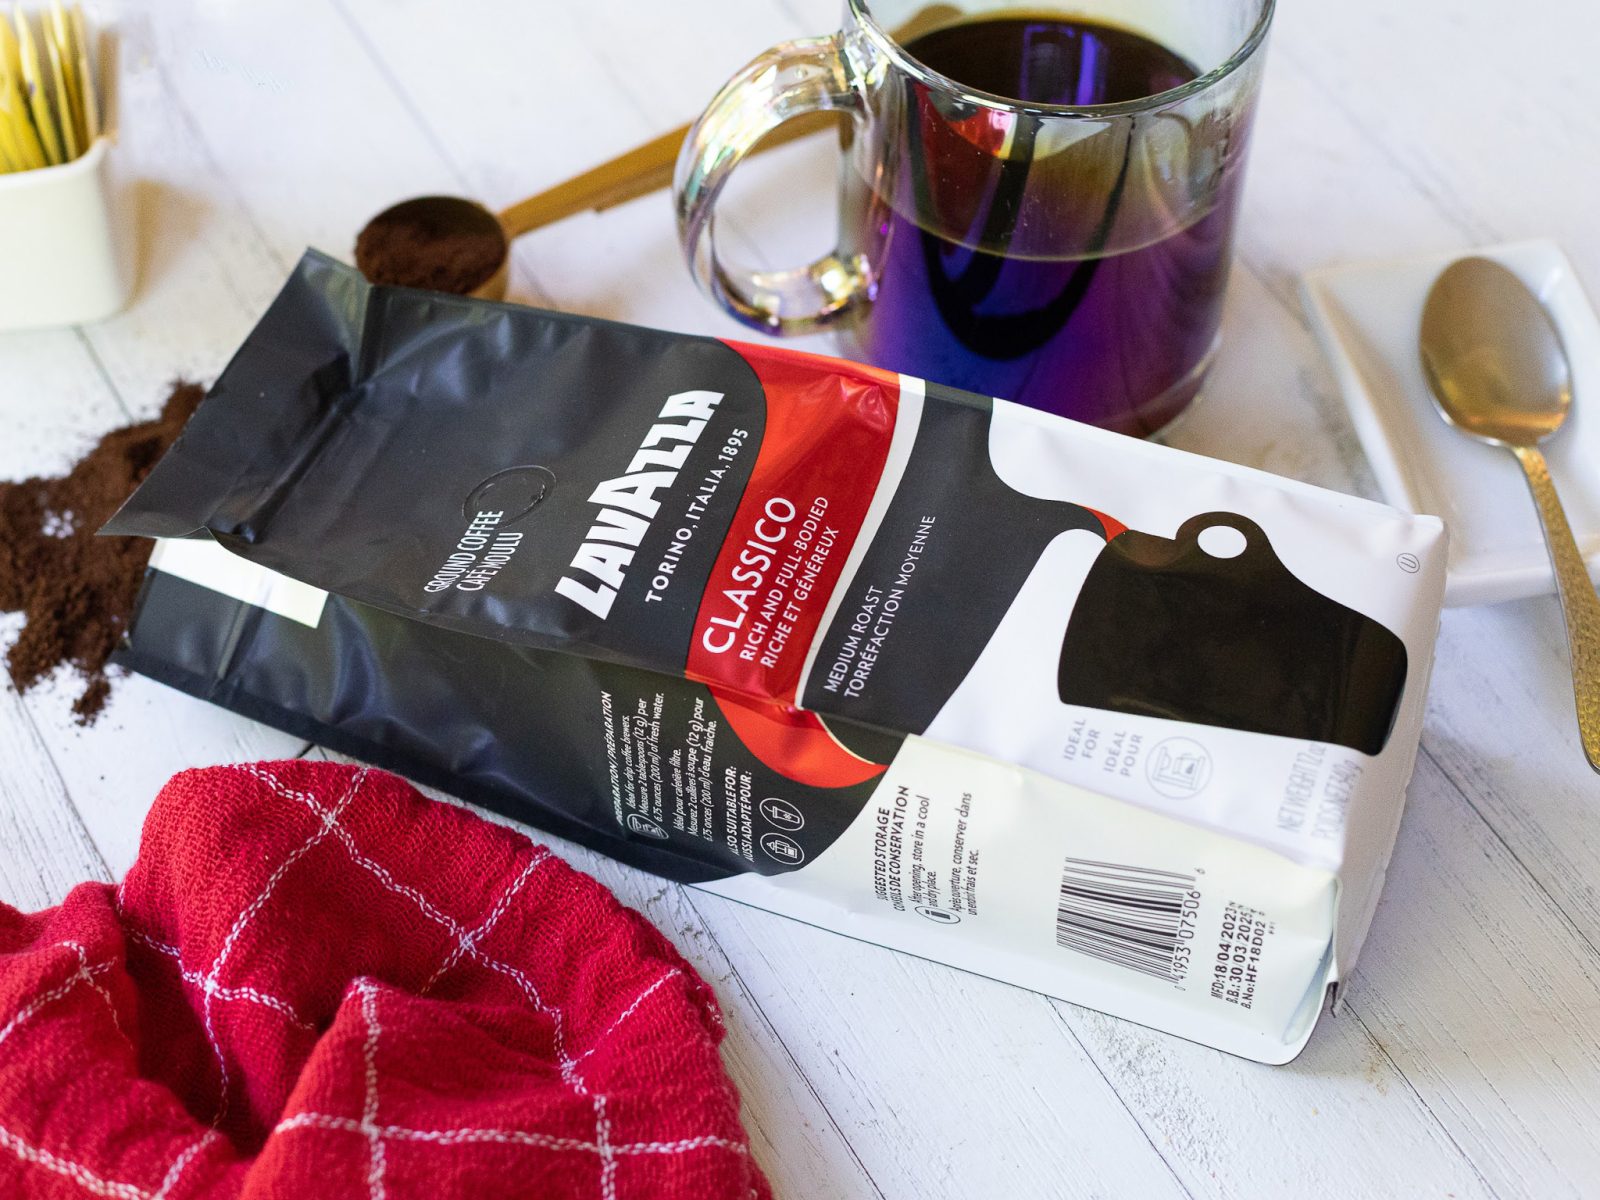 Get LavAzza Coffee As Low As $4.99 At Kroger (Regular Price $9.99)